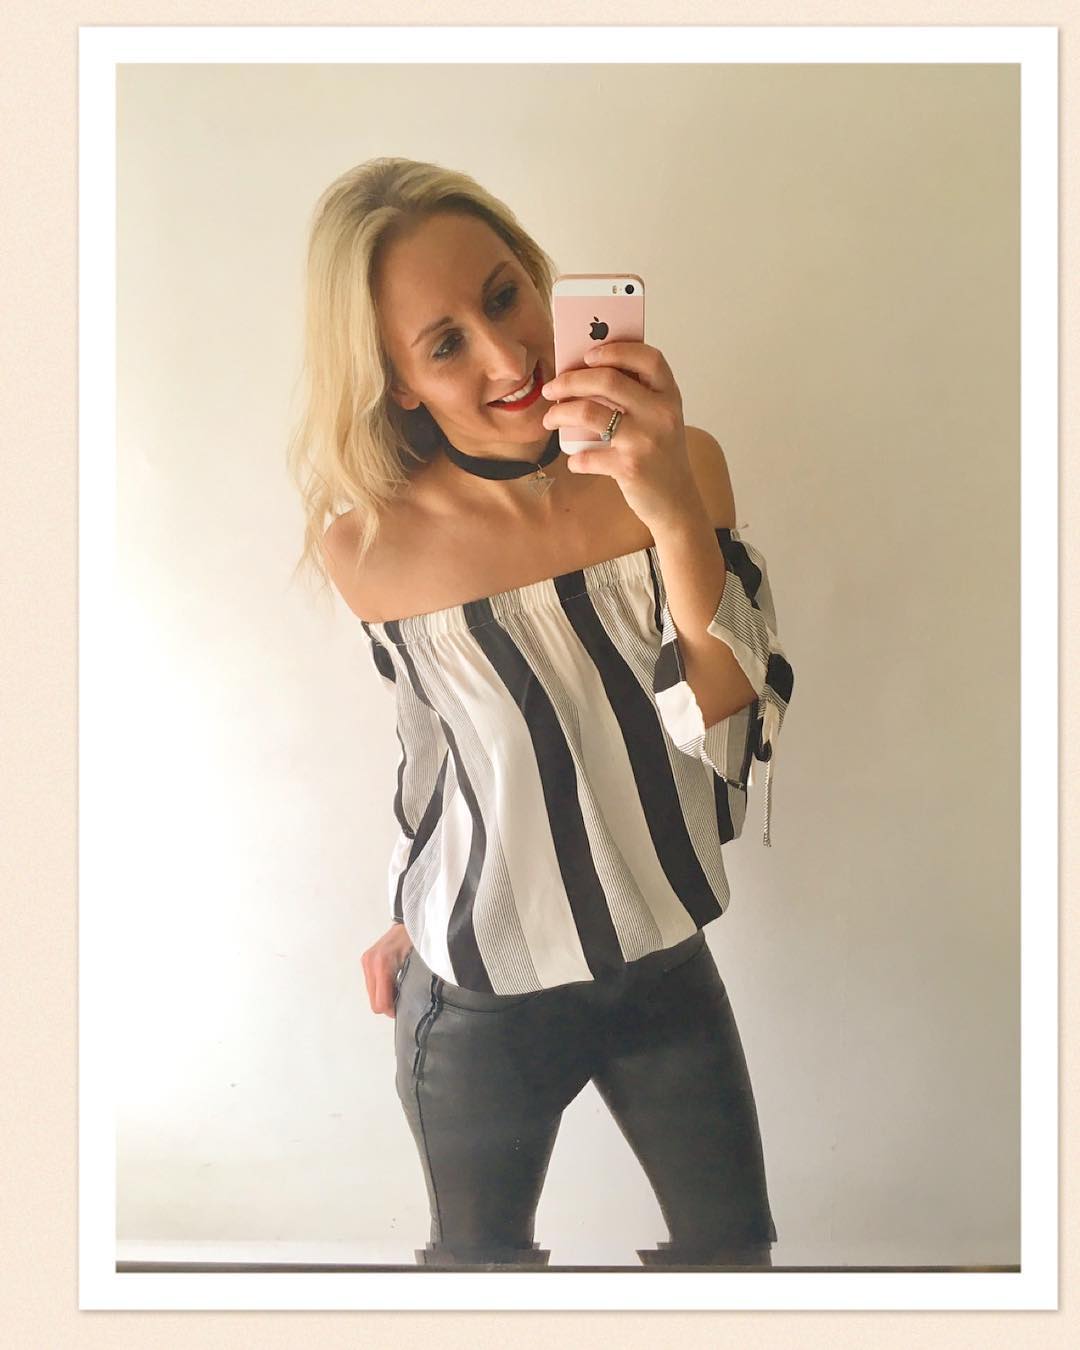 Awesome Striped Outfits to Explore a New You